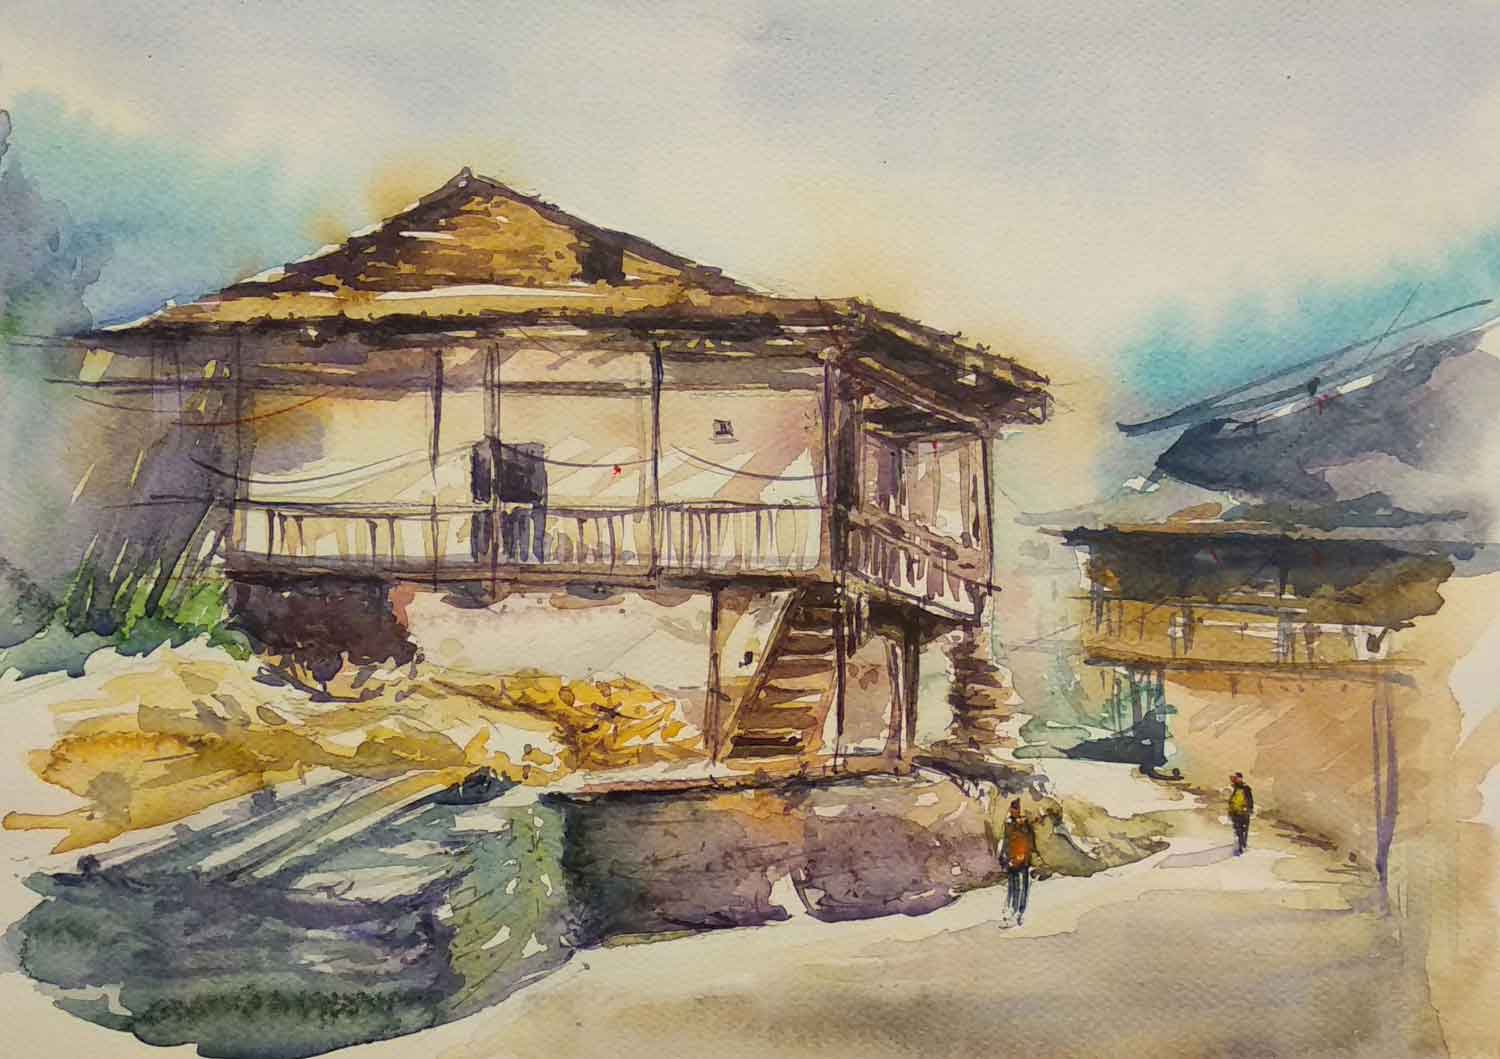 Realism Painting with Watercolor on Paper "Village In Kullu" art by Puran Thapa